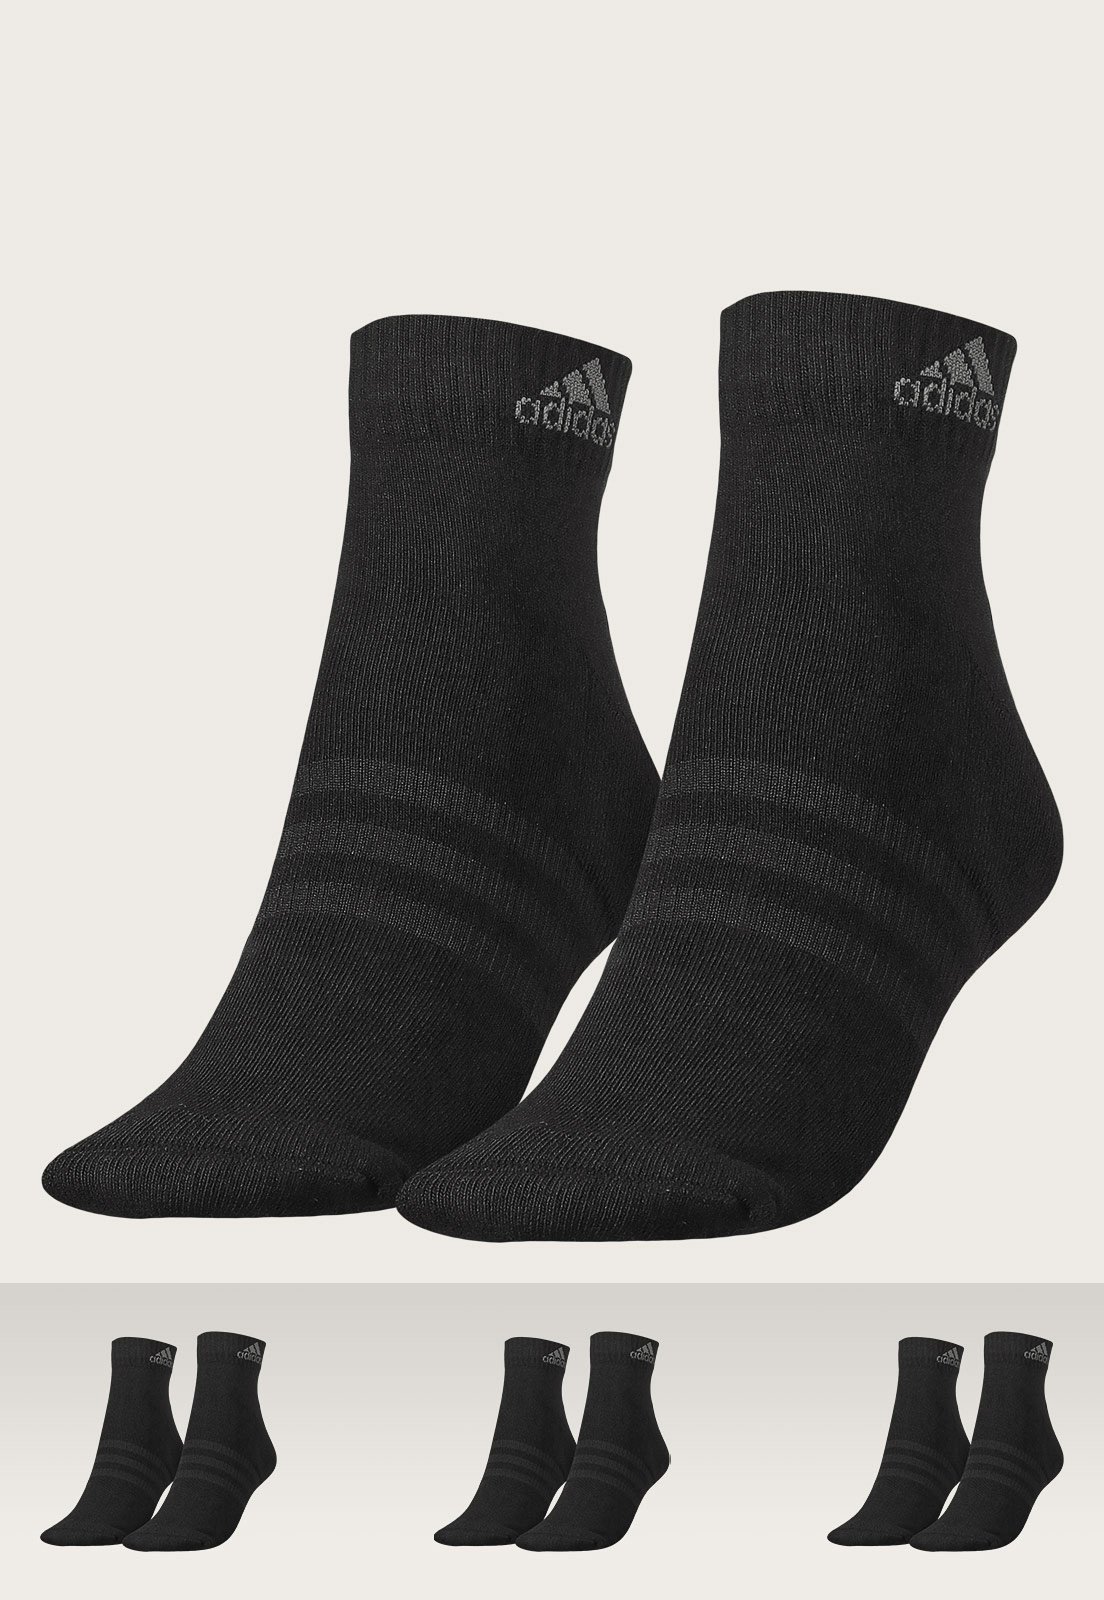 adidas Cushioned Ankle 3-Pack Socks